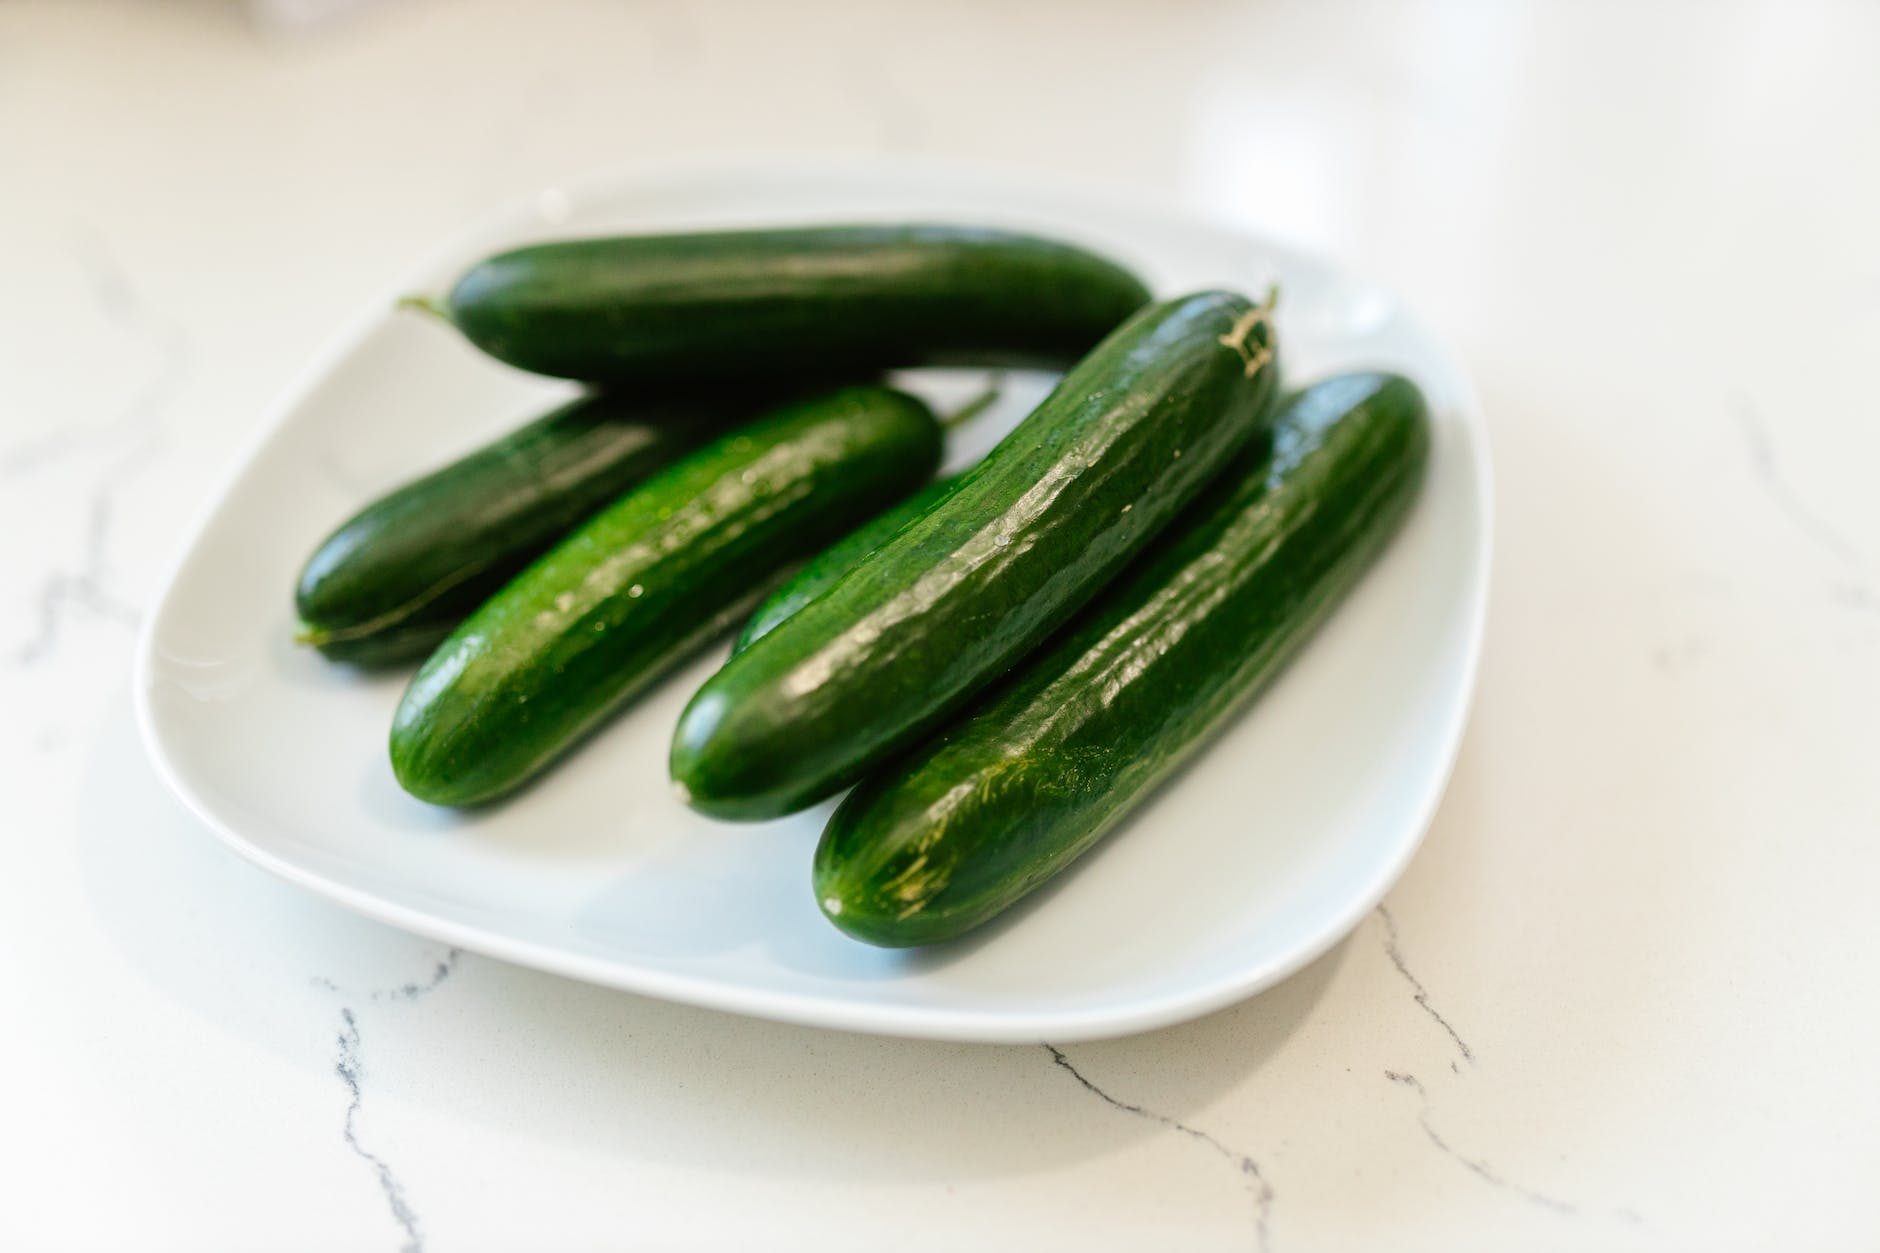 cucumber on plate